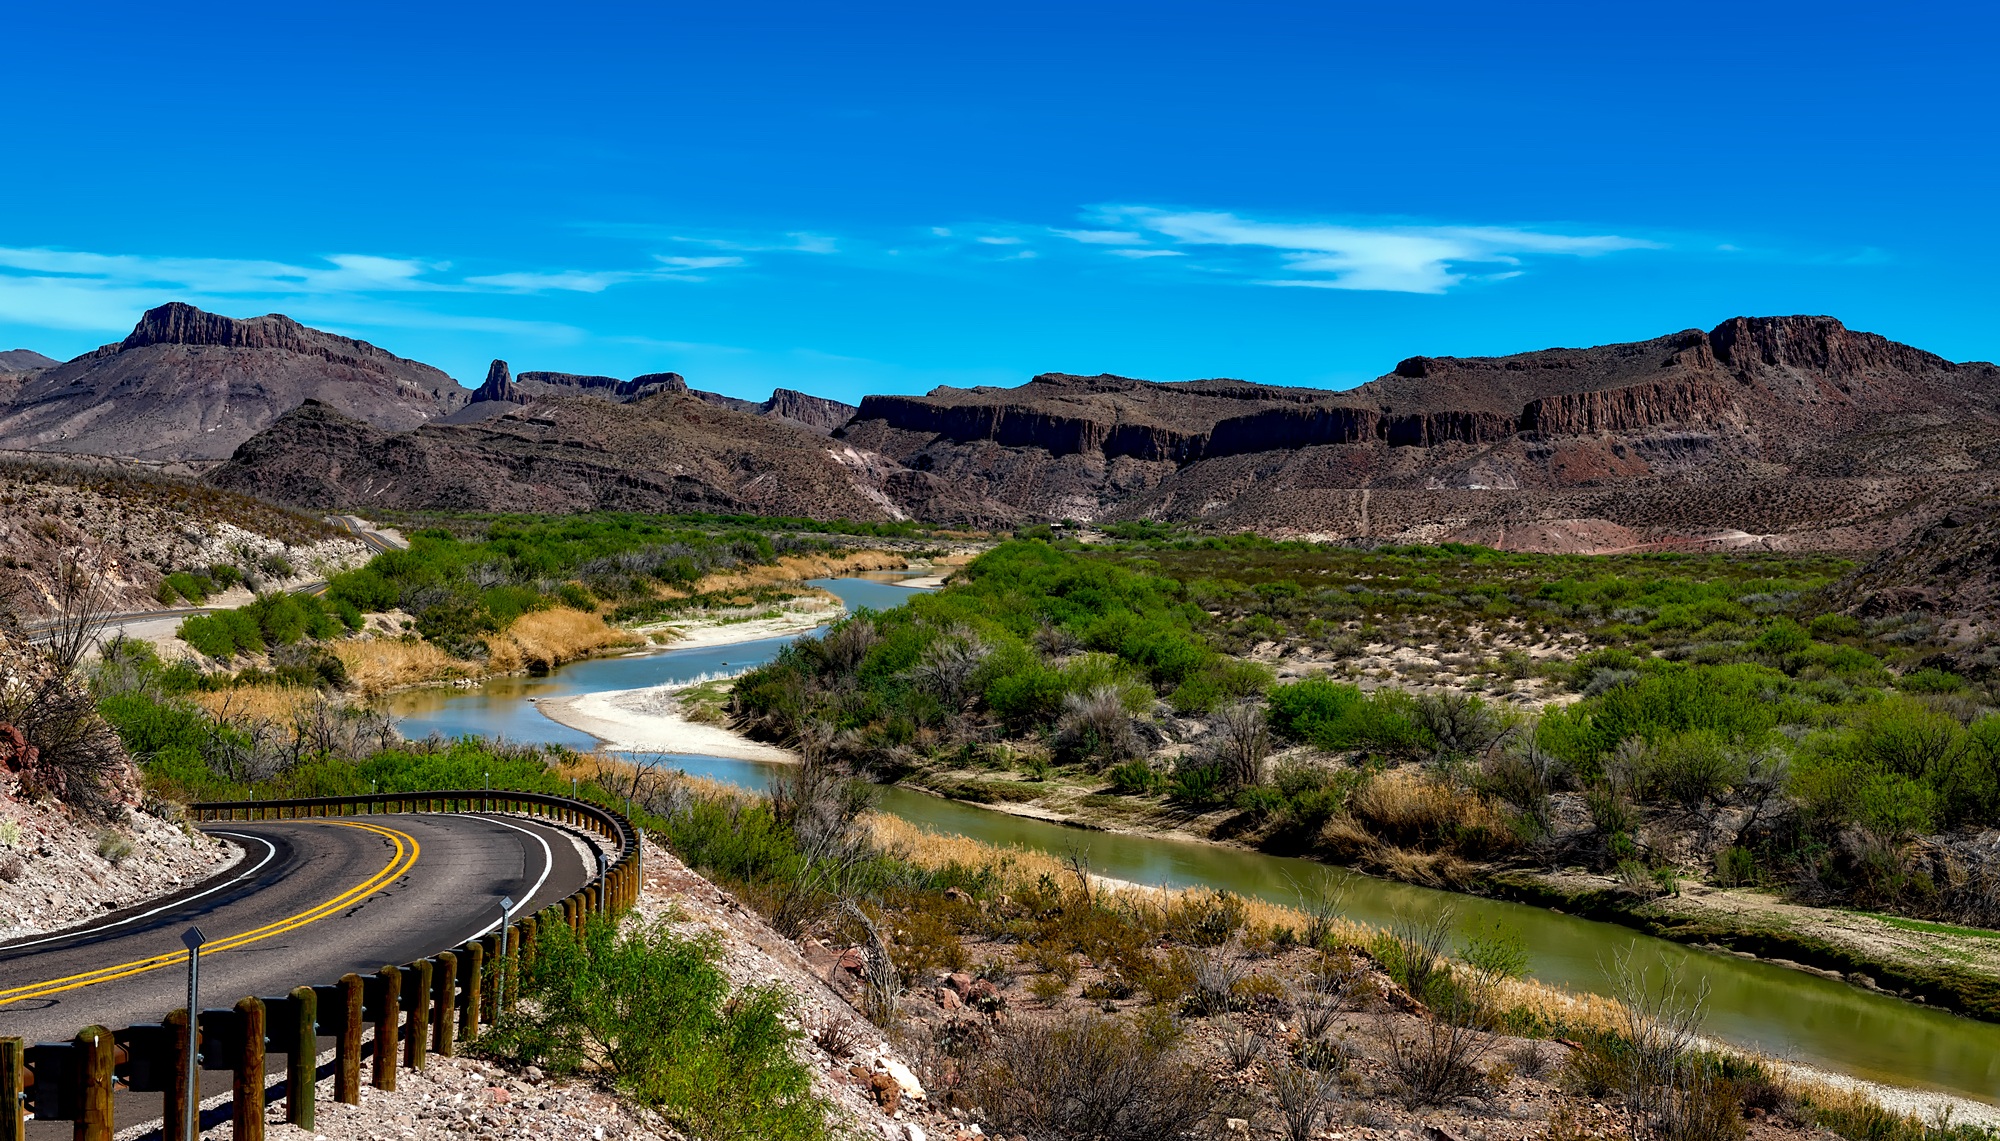 GOING WILD IN WEST TEXAS: A PRIVATE RANCH ROAD TRIP